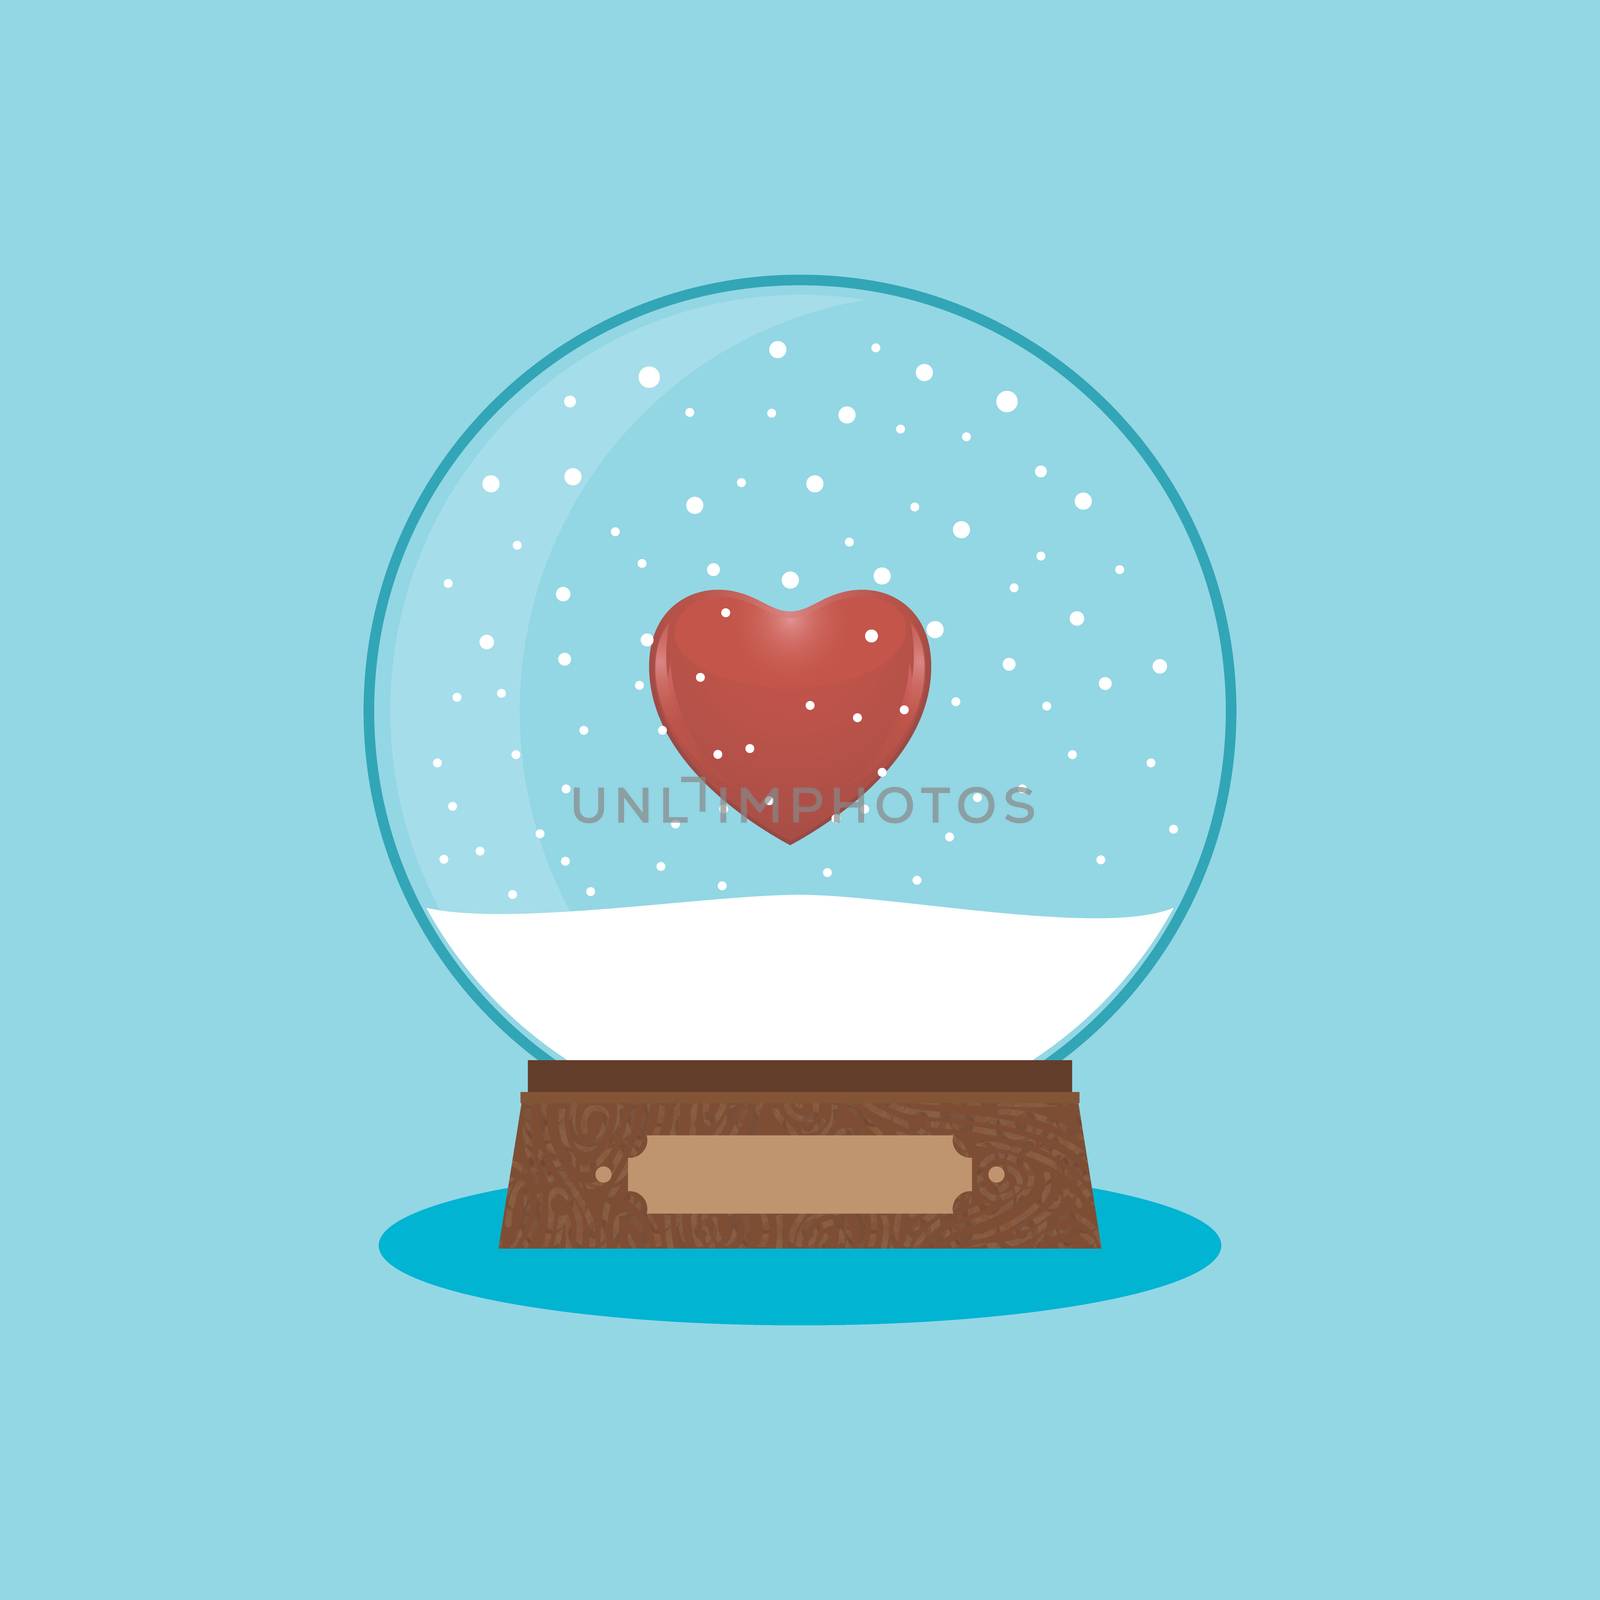 Snow globe on a blue background, heart inside. Merry Christmas and Happy New Year. illustration by Roman1030